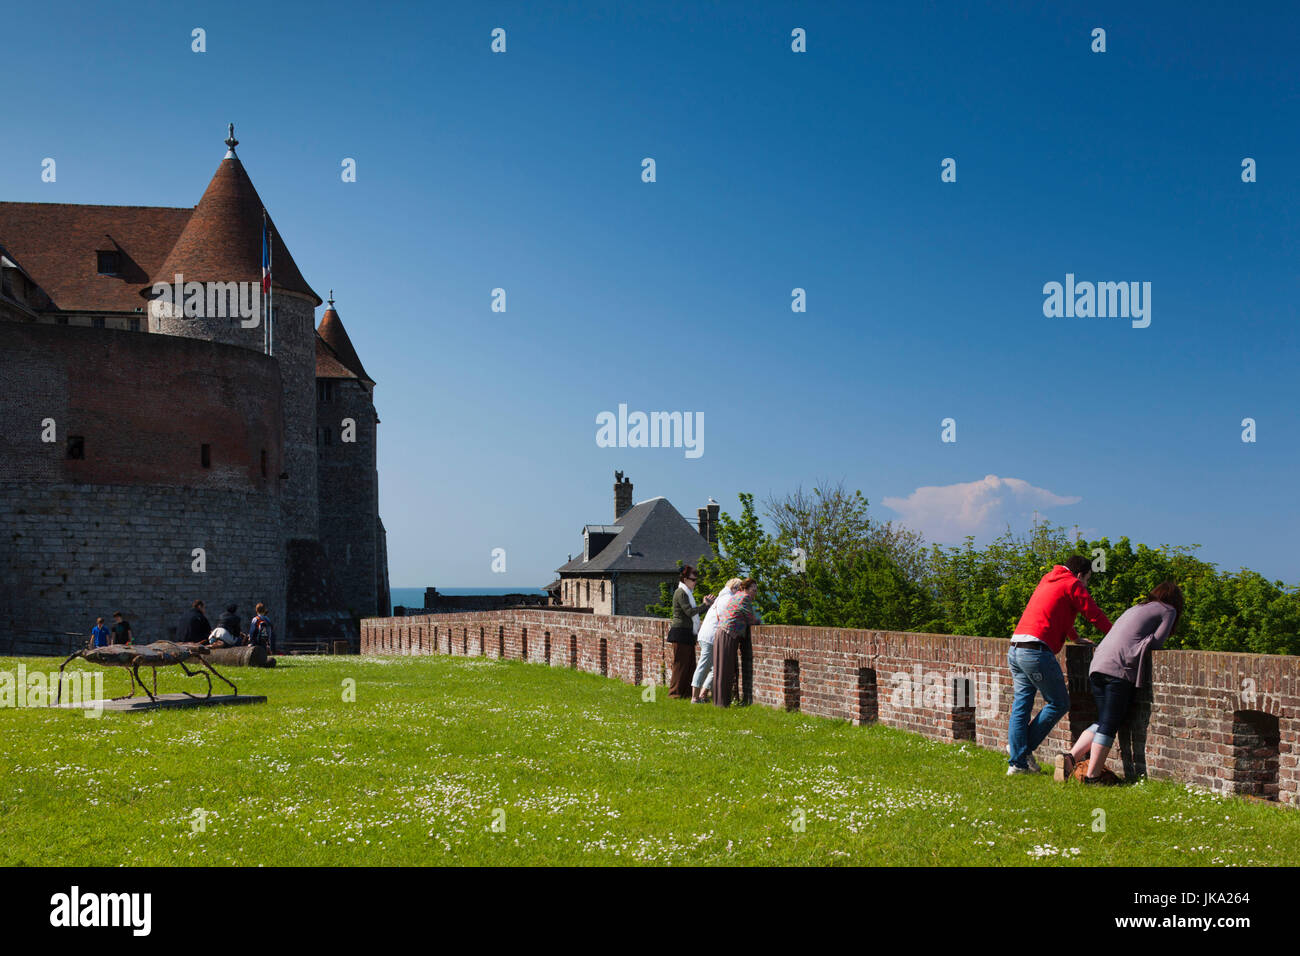 France, Normandy Region, Seine-Maritime Department, Dieppe, Dieppe Chateau Musee, town castle museum, visitors, NR Stock Photo